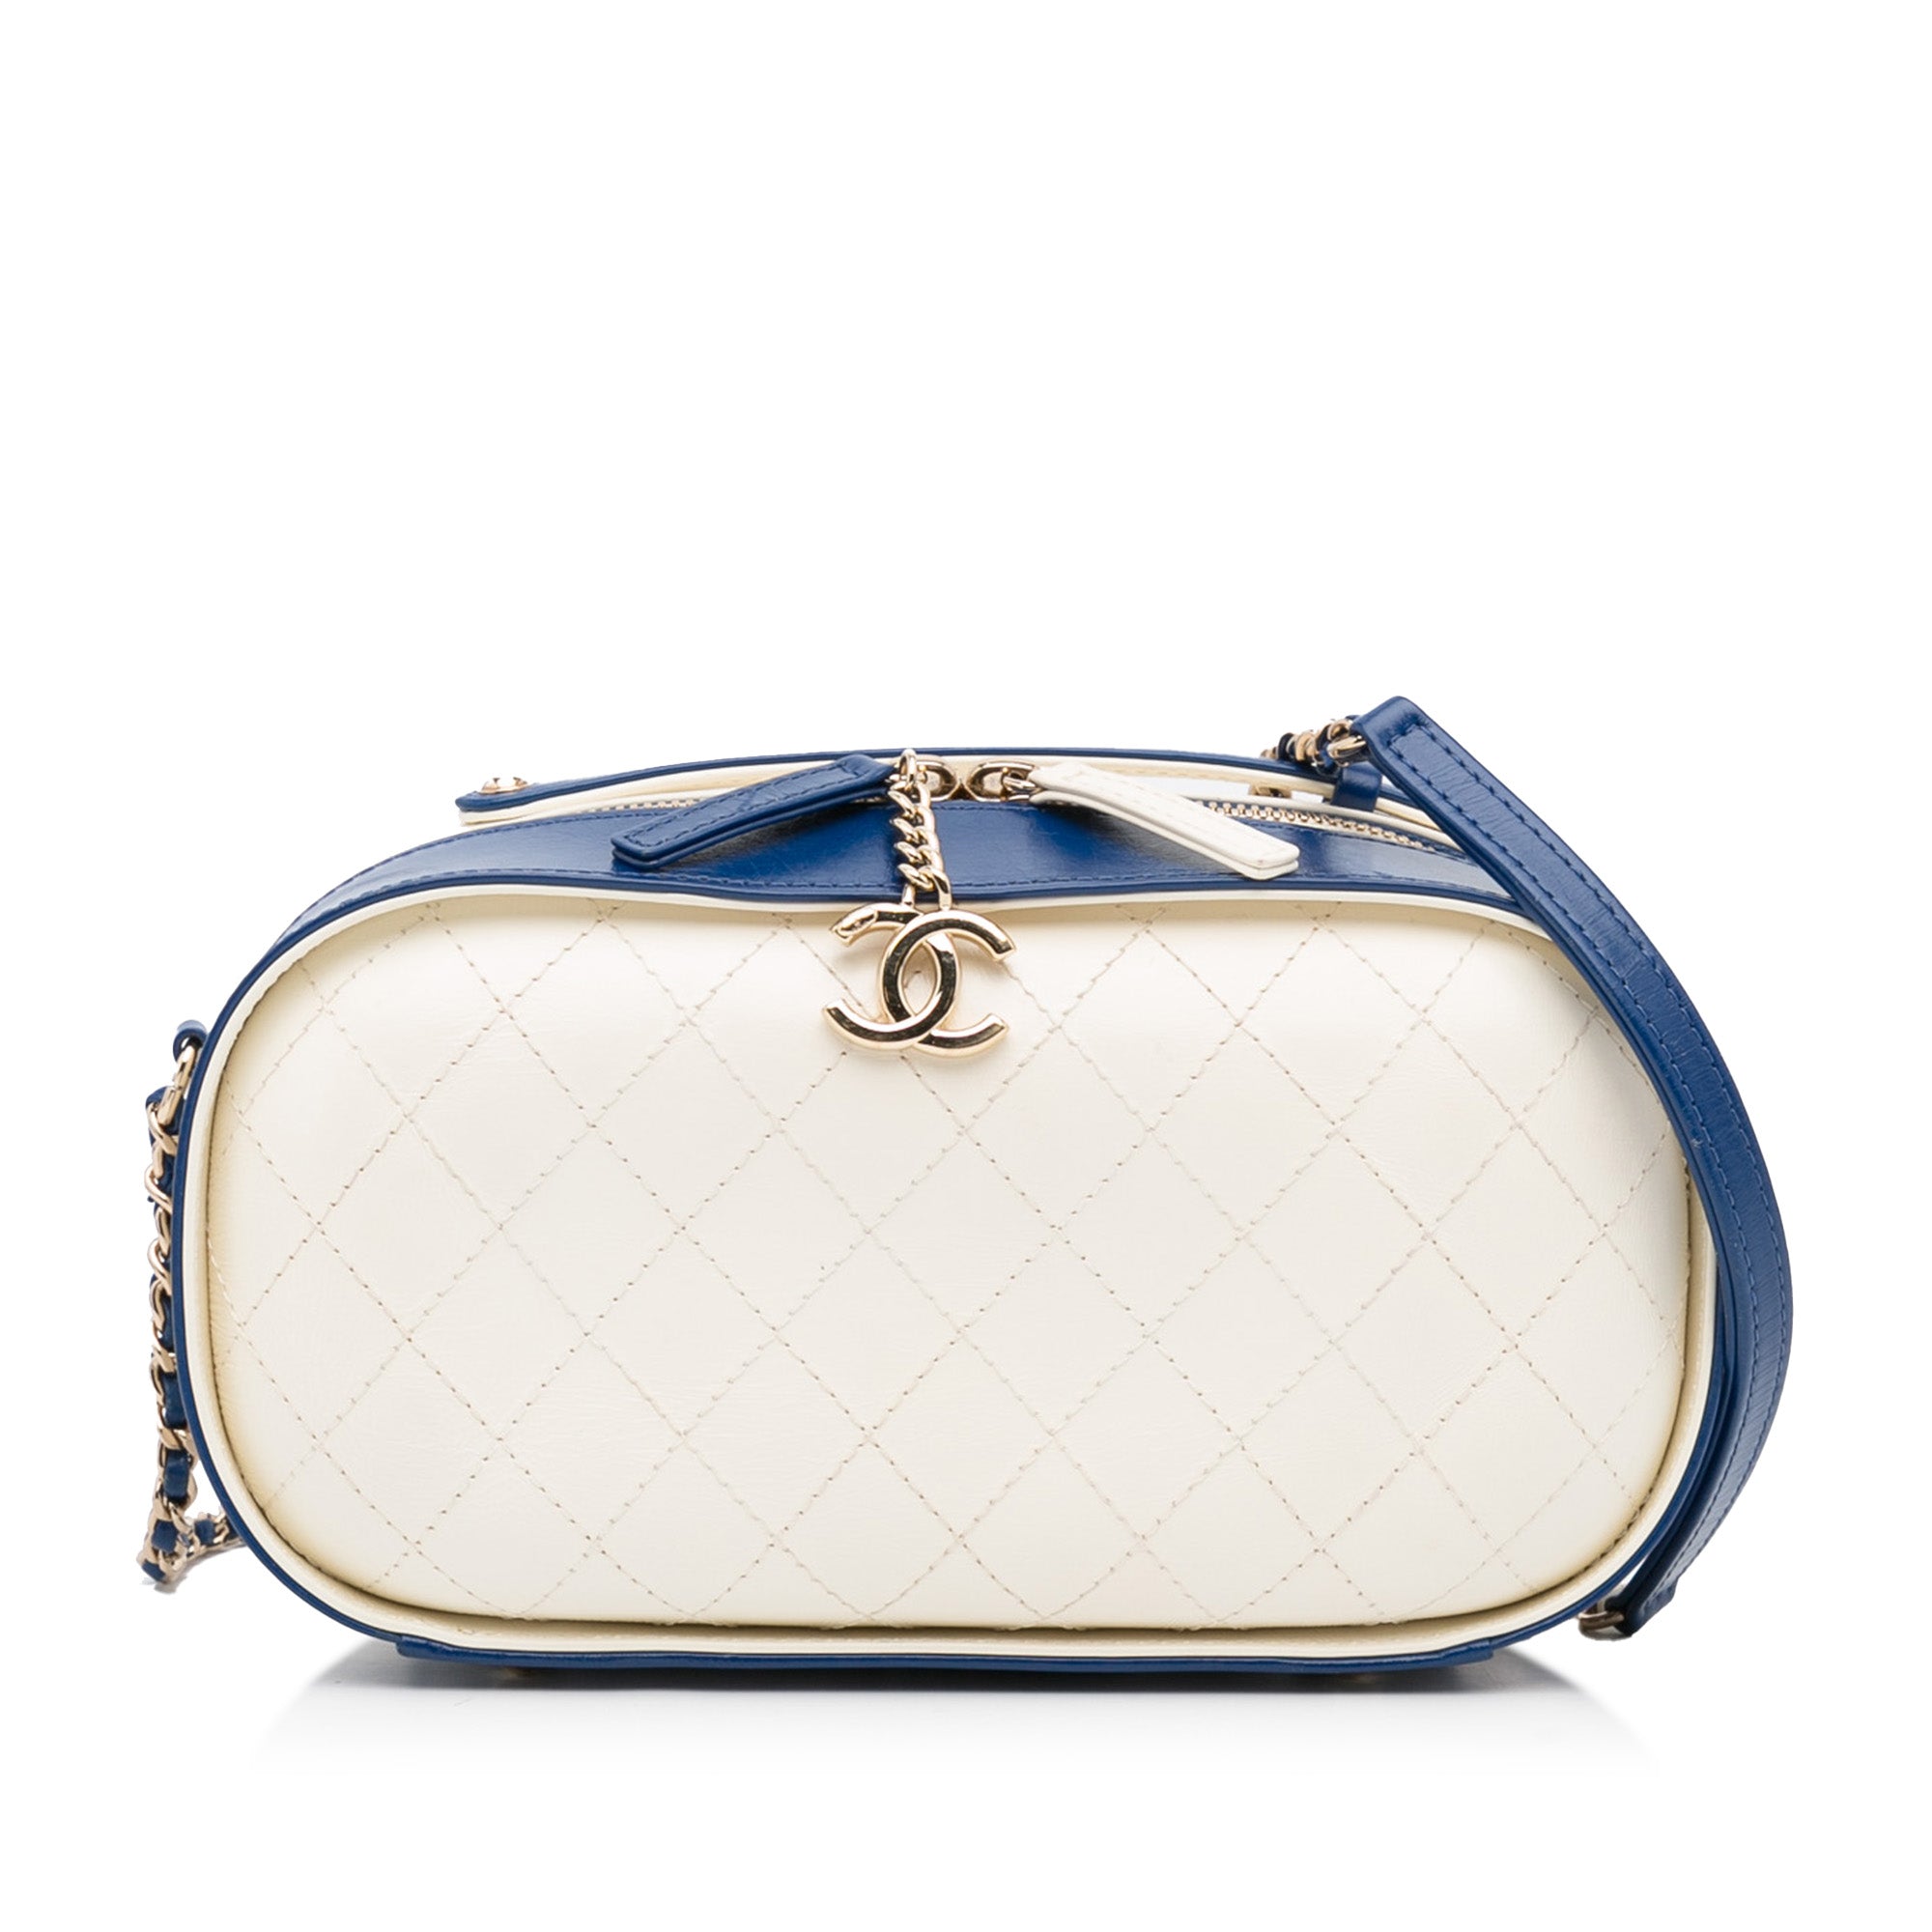 White Chanel Quilted Leather Satchel – Designer Revival